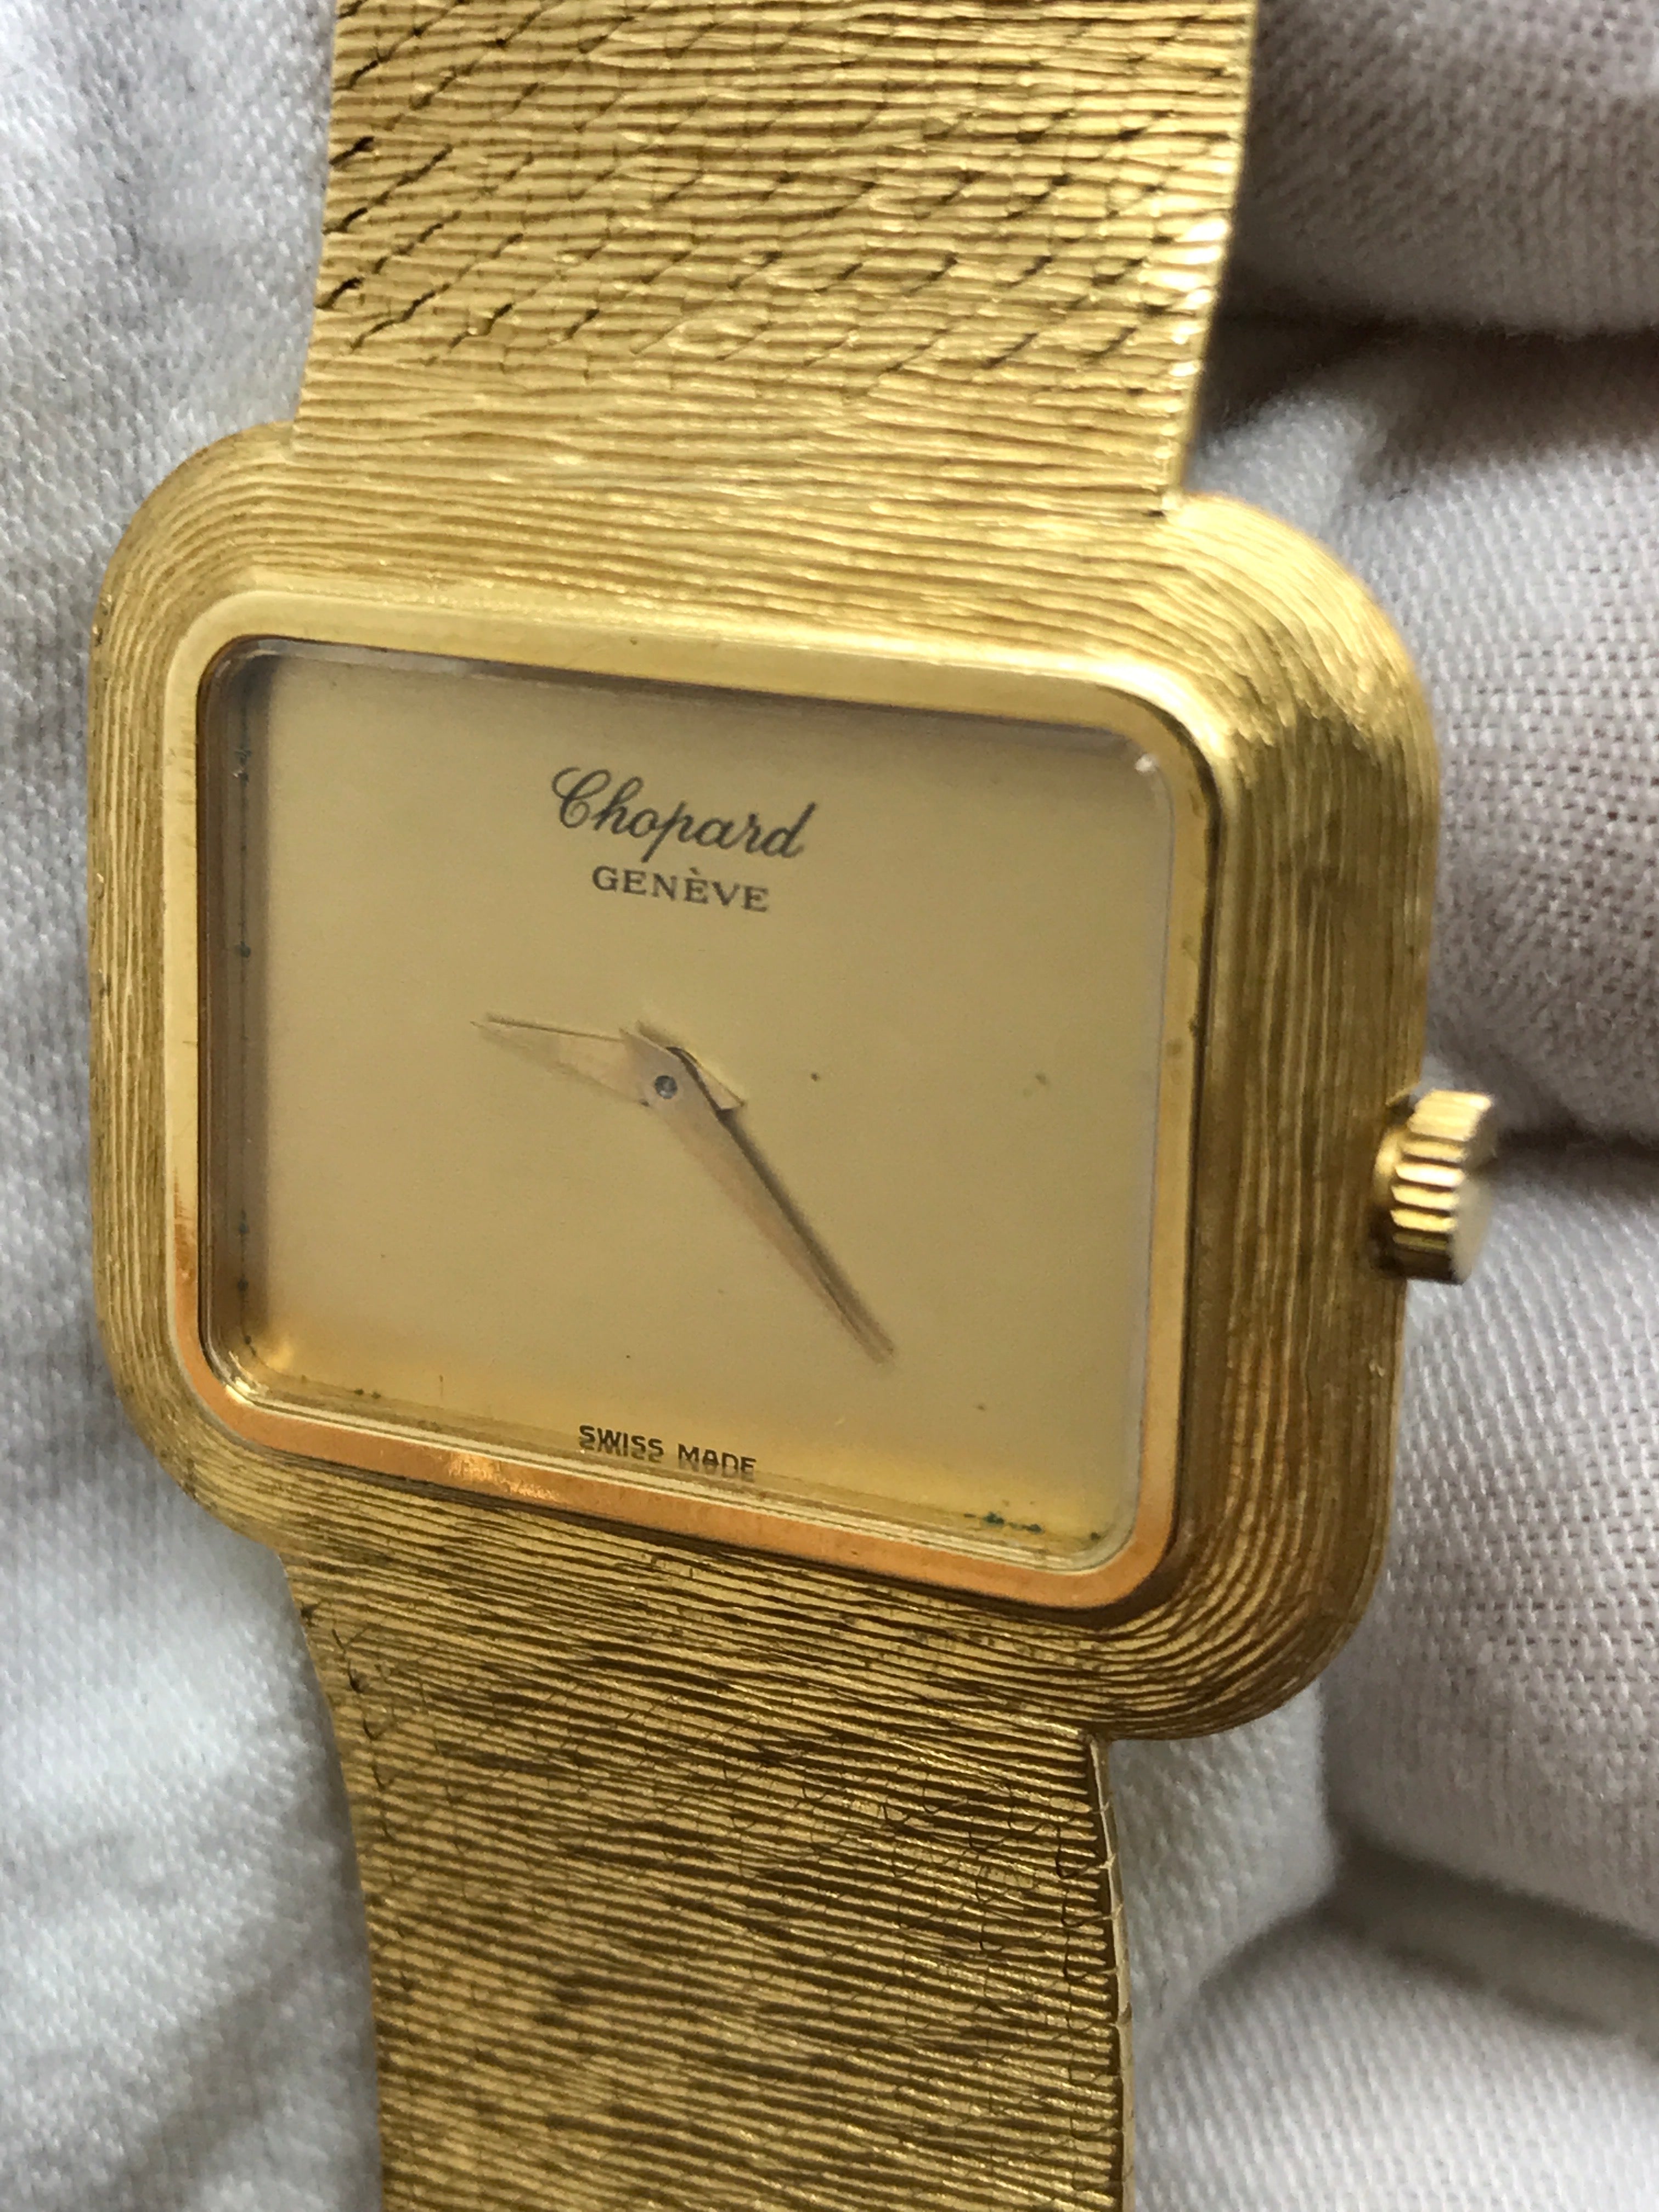 Chopard Geneve Vintage Rectangular Gold Champagne Dial Manual Wind Watch